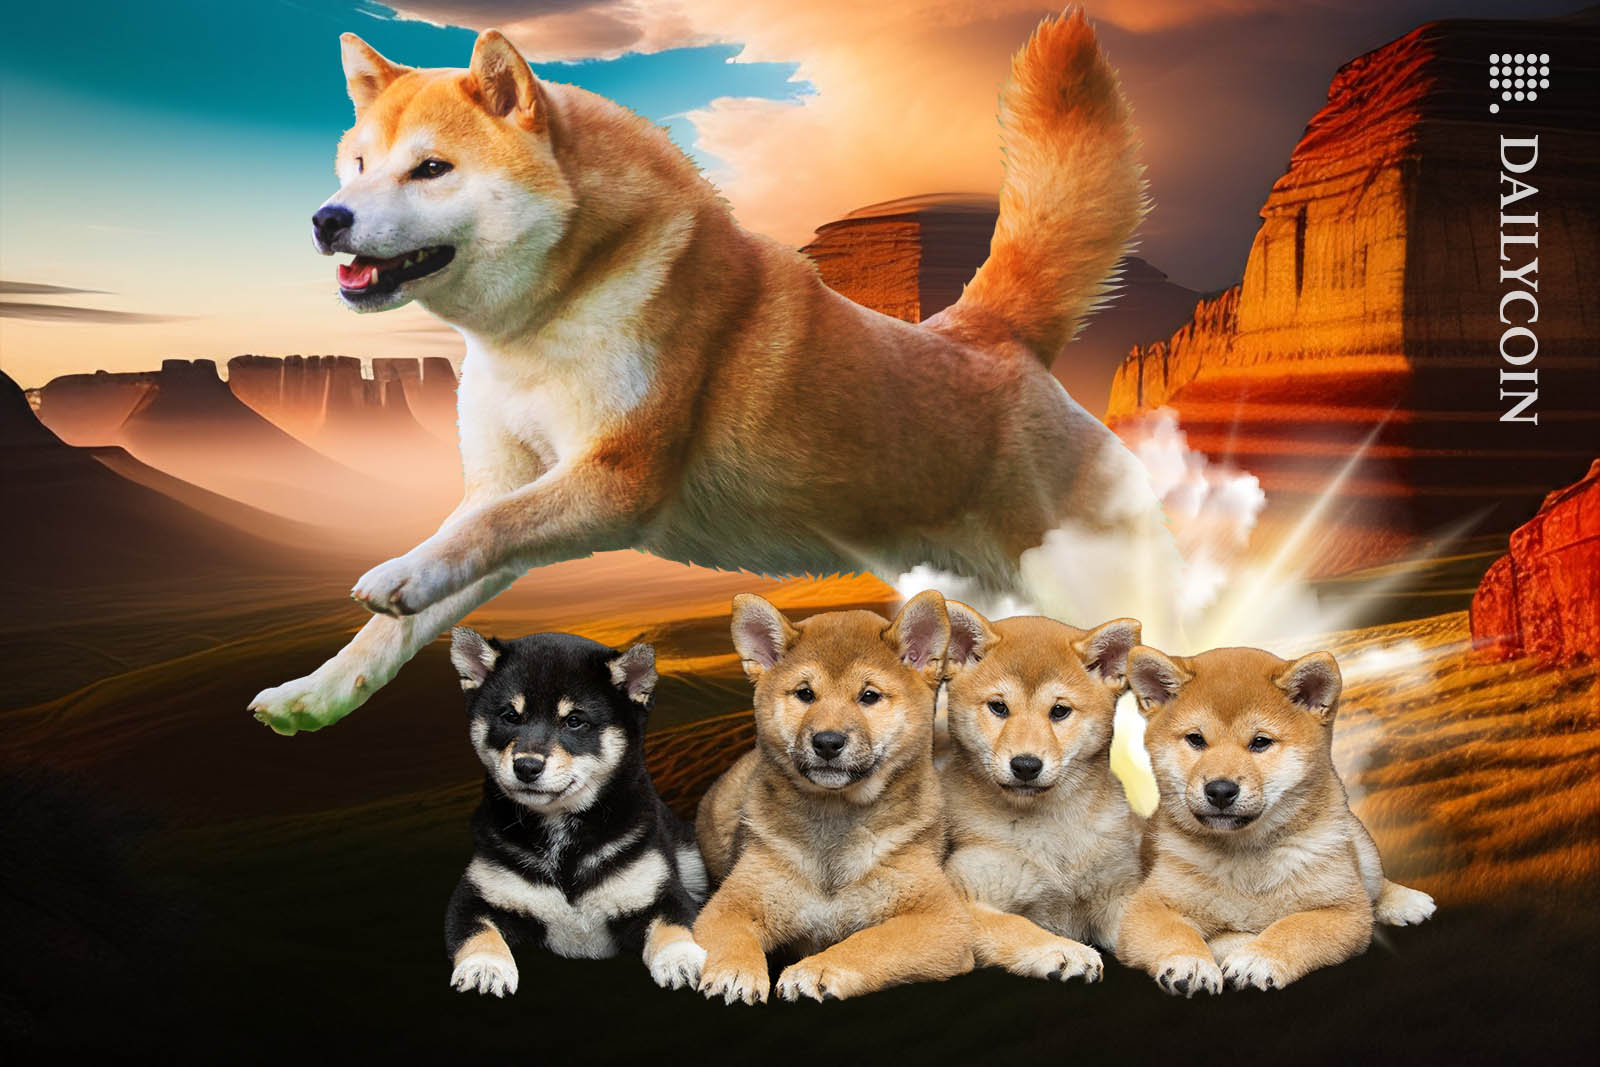 Shiba Inu Wallet Addresses Achieve New Heights in Weekly Run - DailyCoin